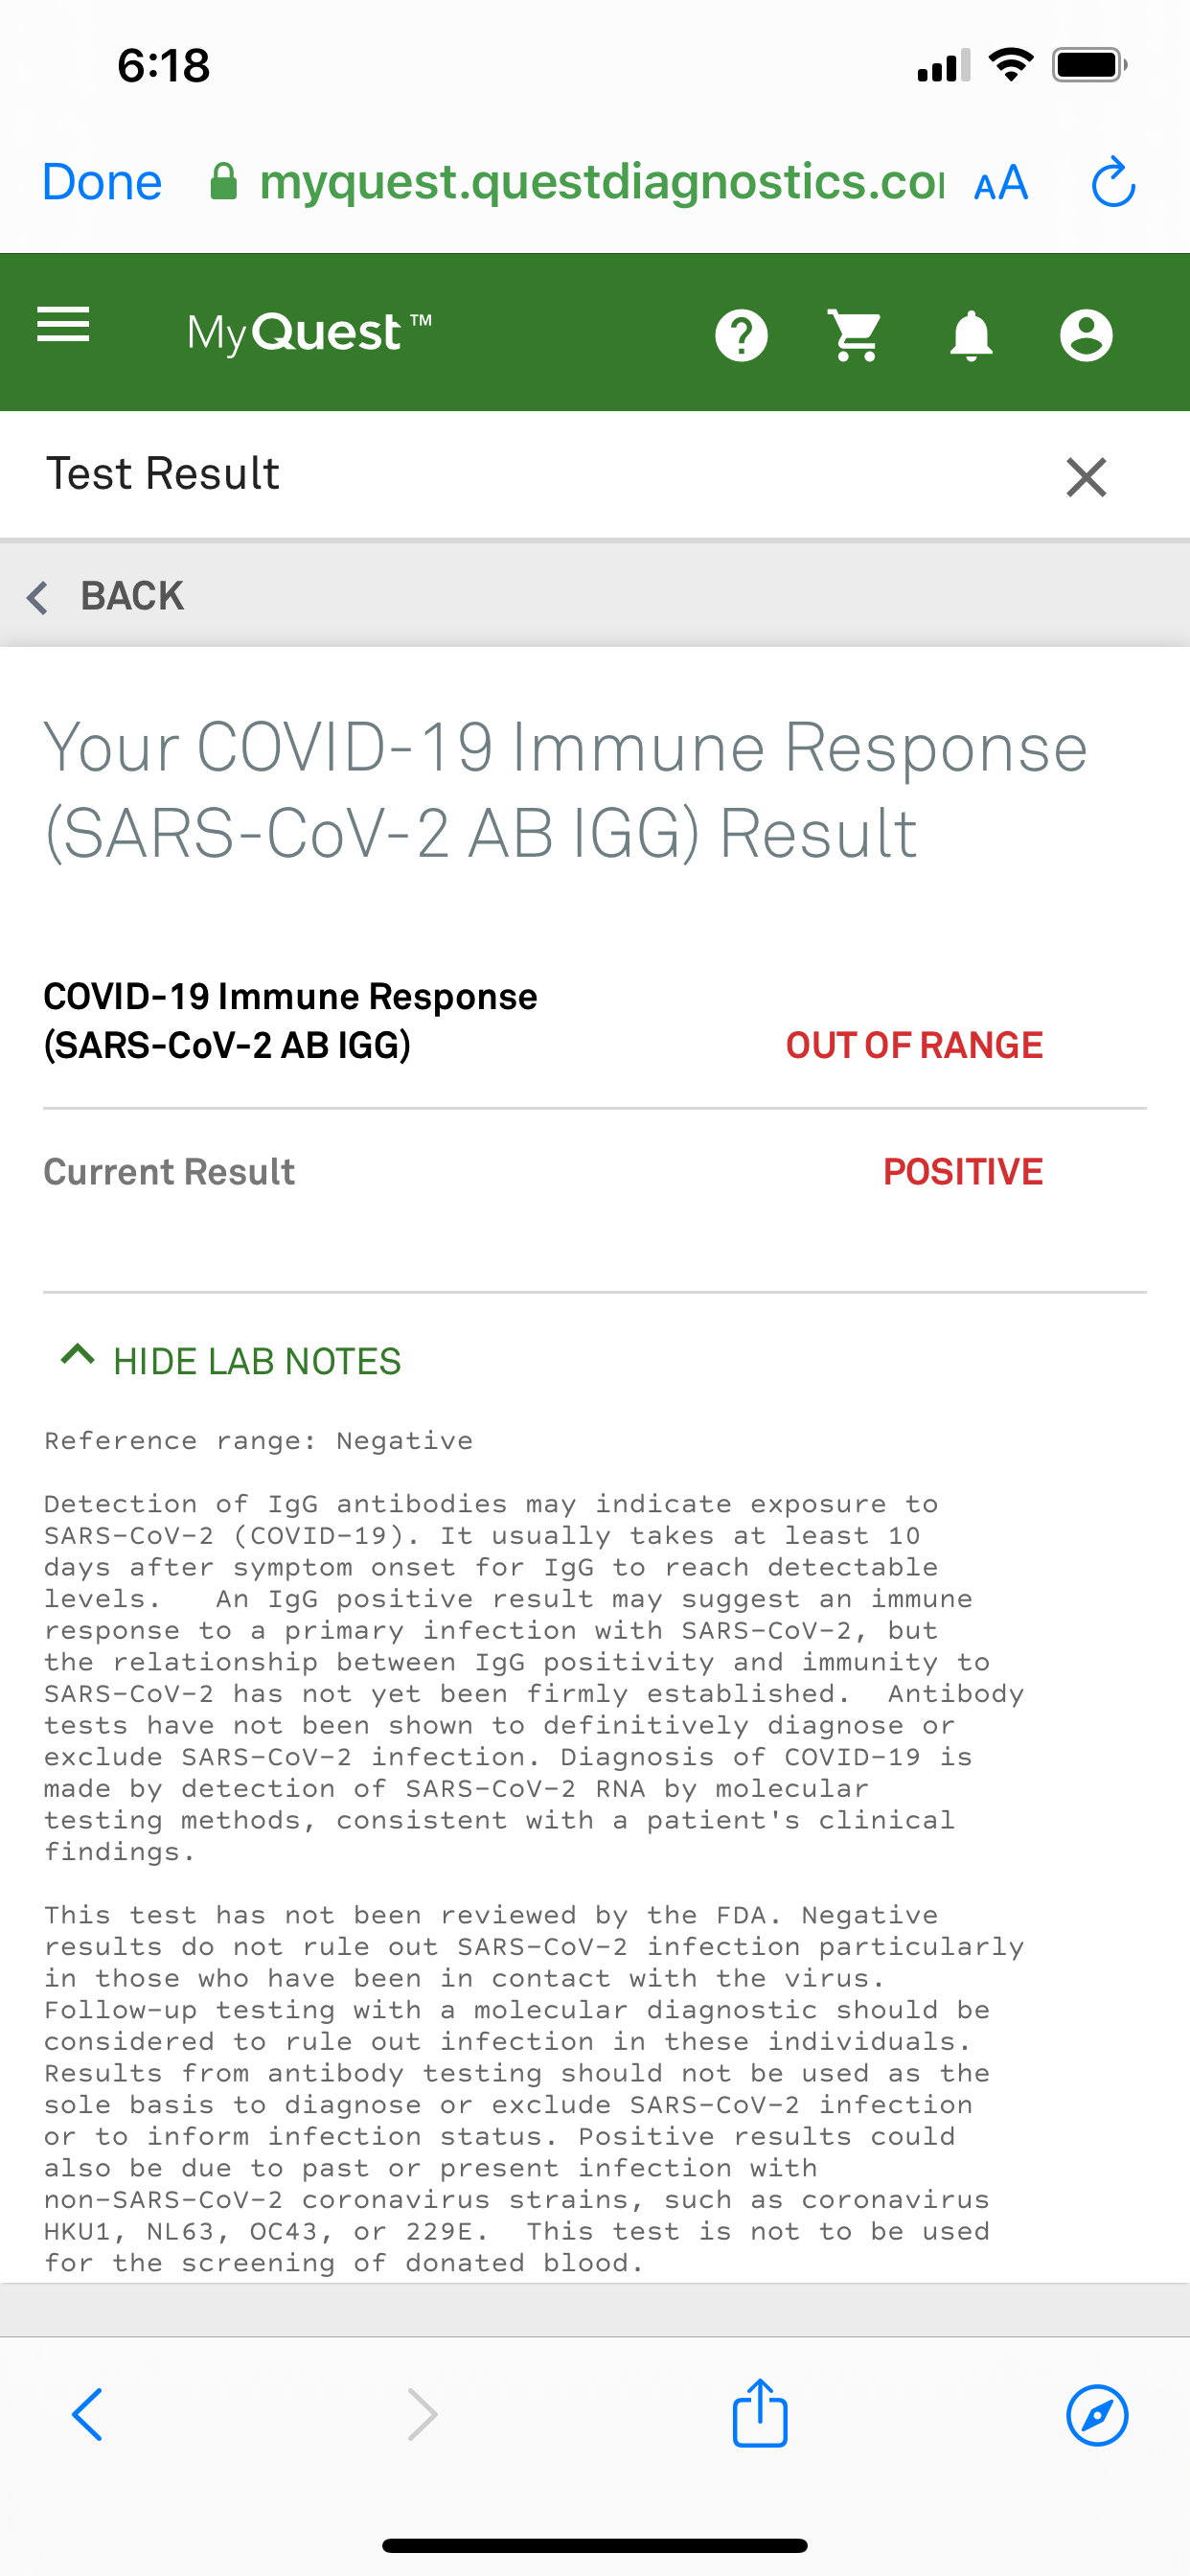 i-tested-positive-for-covid-19-antibodies-so-now-what